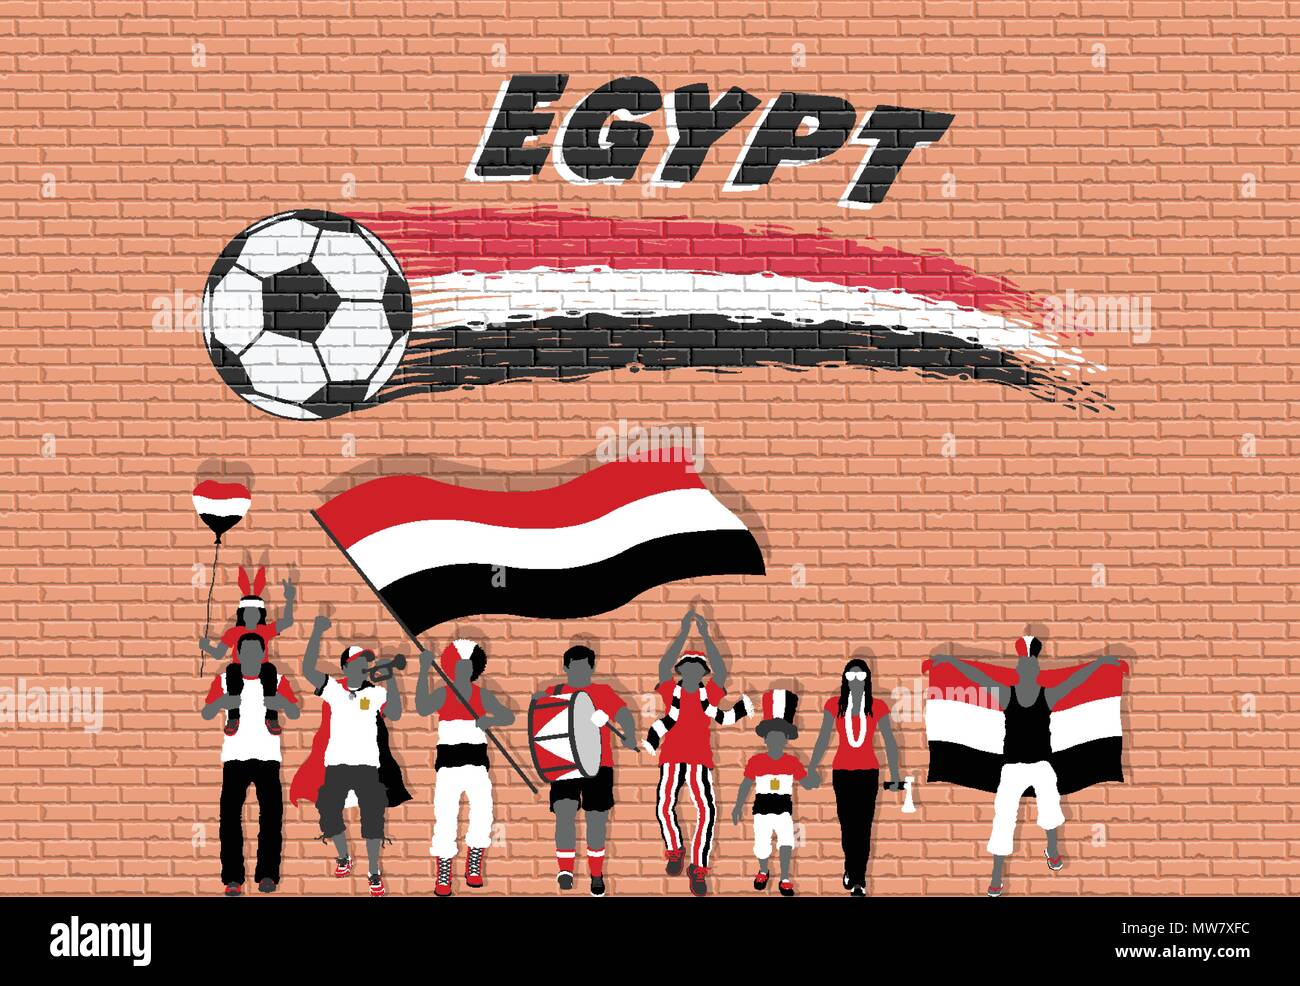 Egyptian football fans cheering with Egypt flag colors in front of soccer ball graffiti. All the objects are in different layers and the text types do Stock Vector